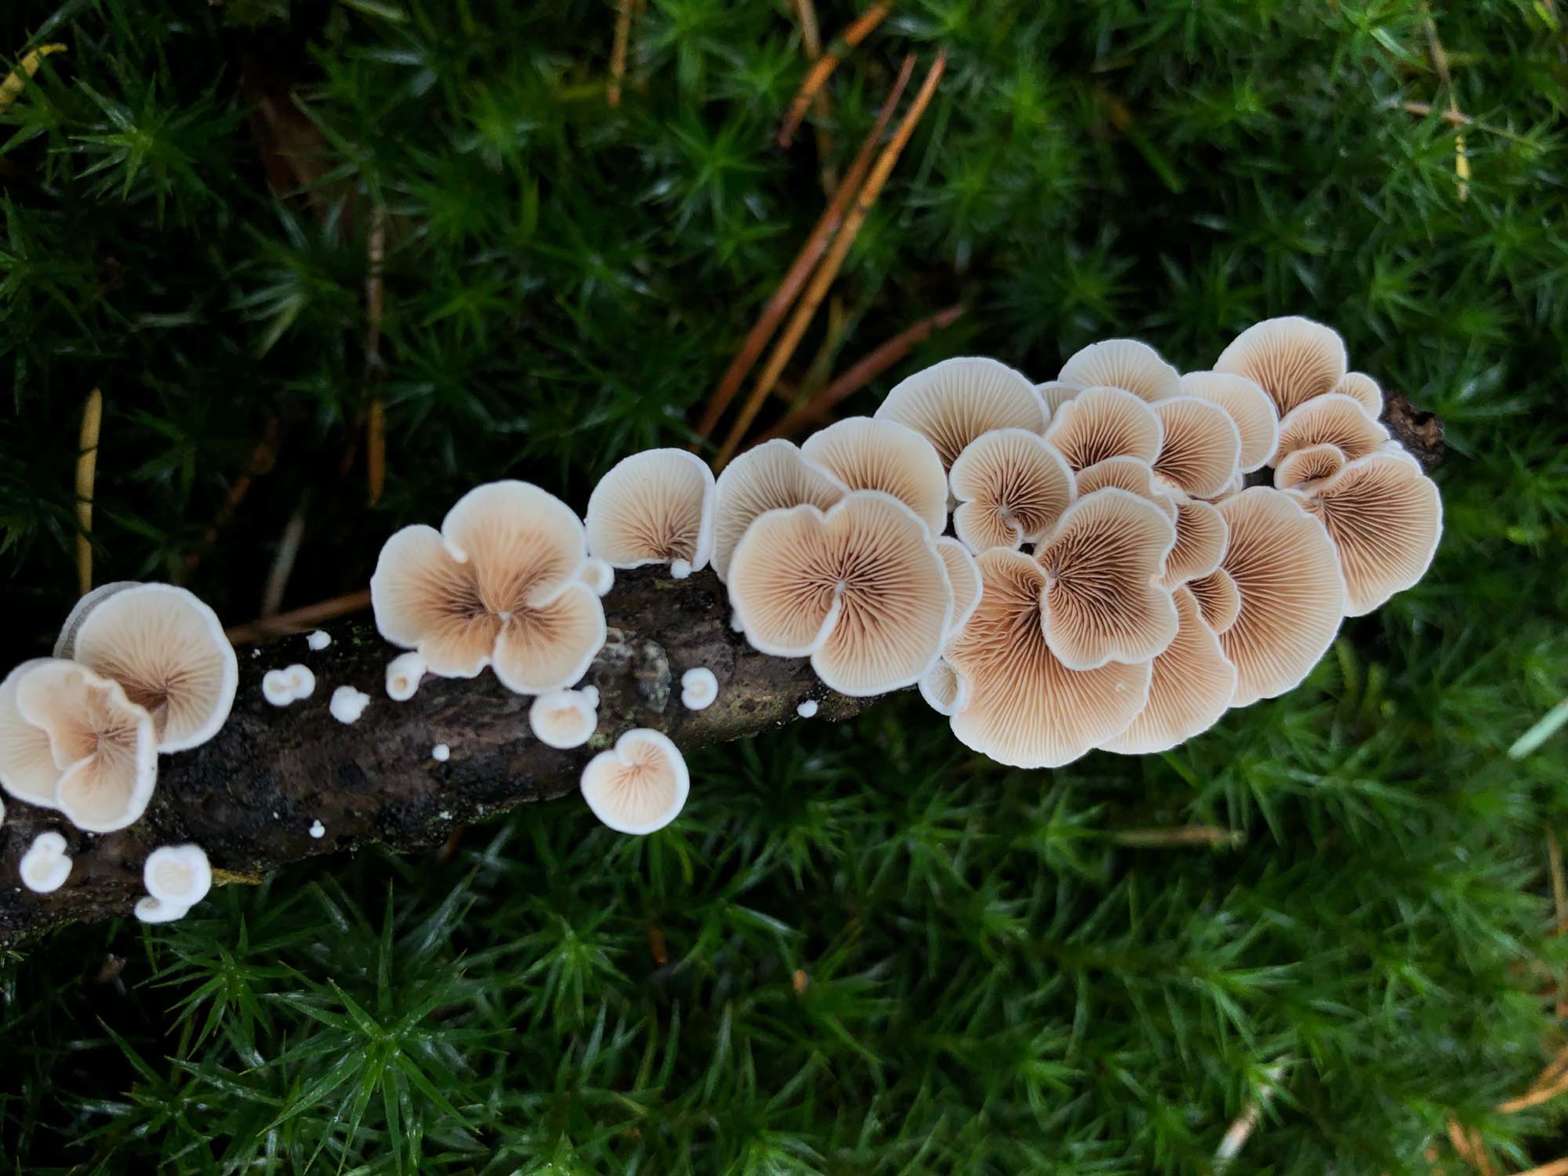 Fungus growing on and extracting nutrients from a branch bark